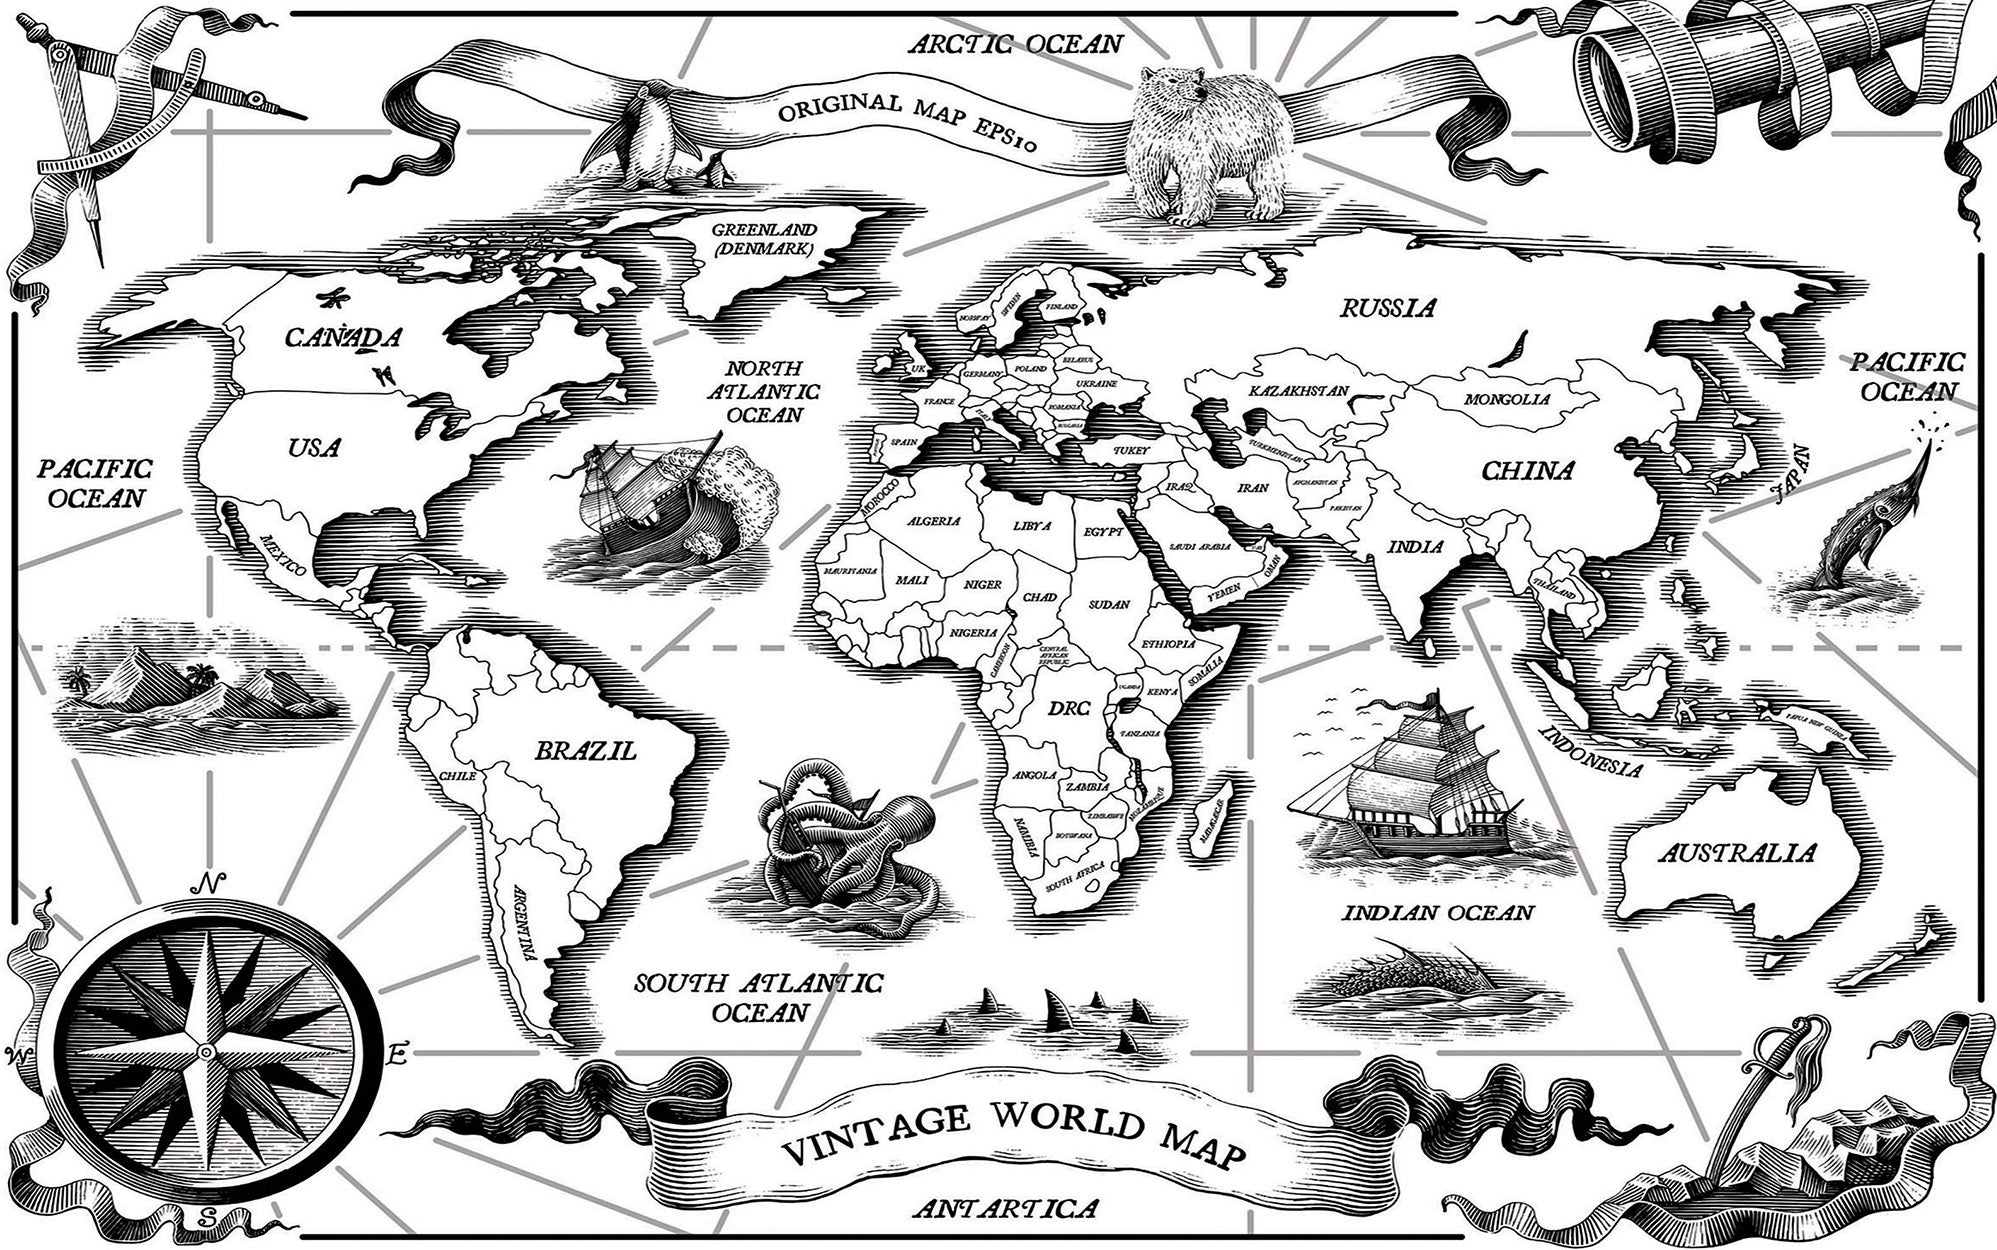 Black and white vintage world map with decorative elements on an interior wall.